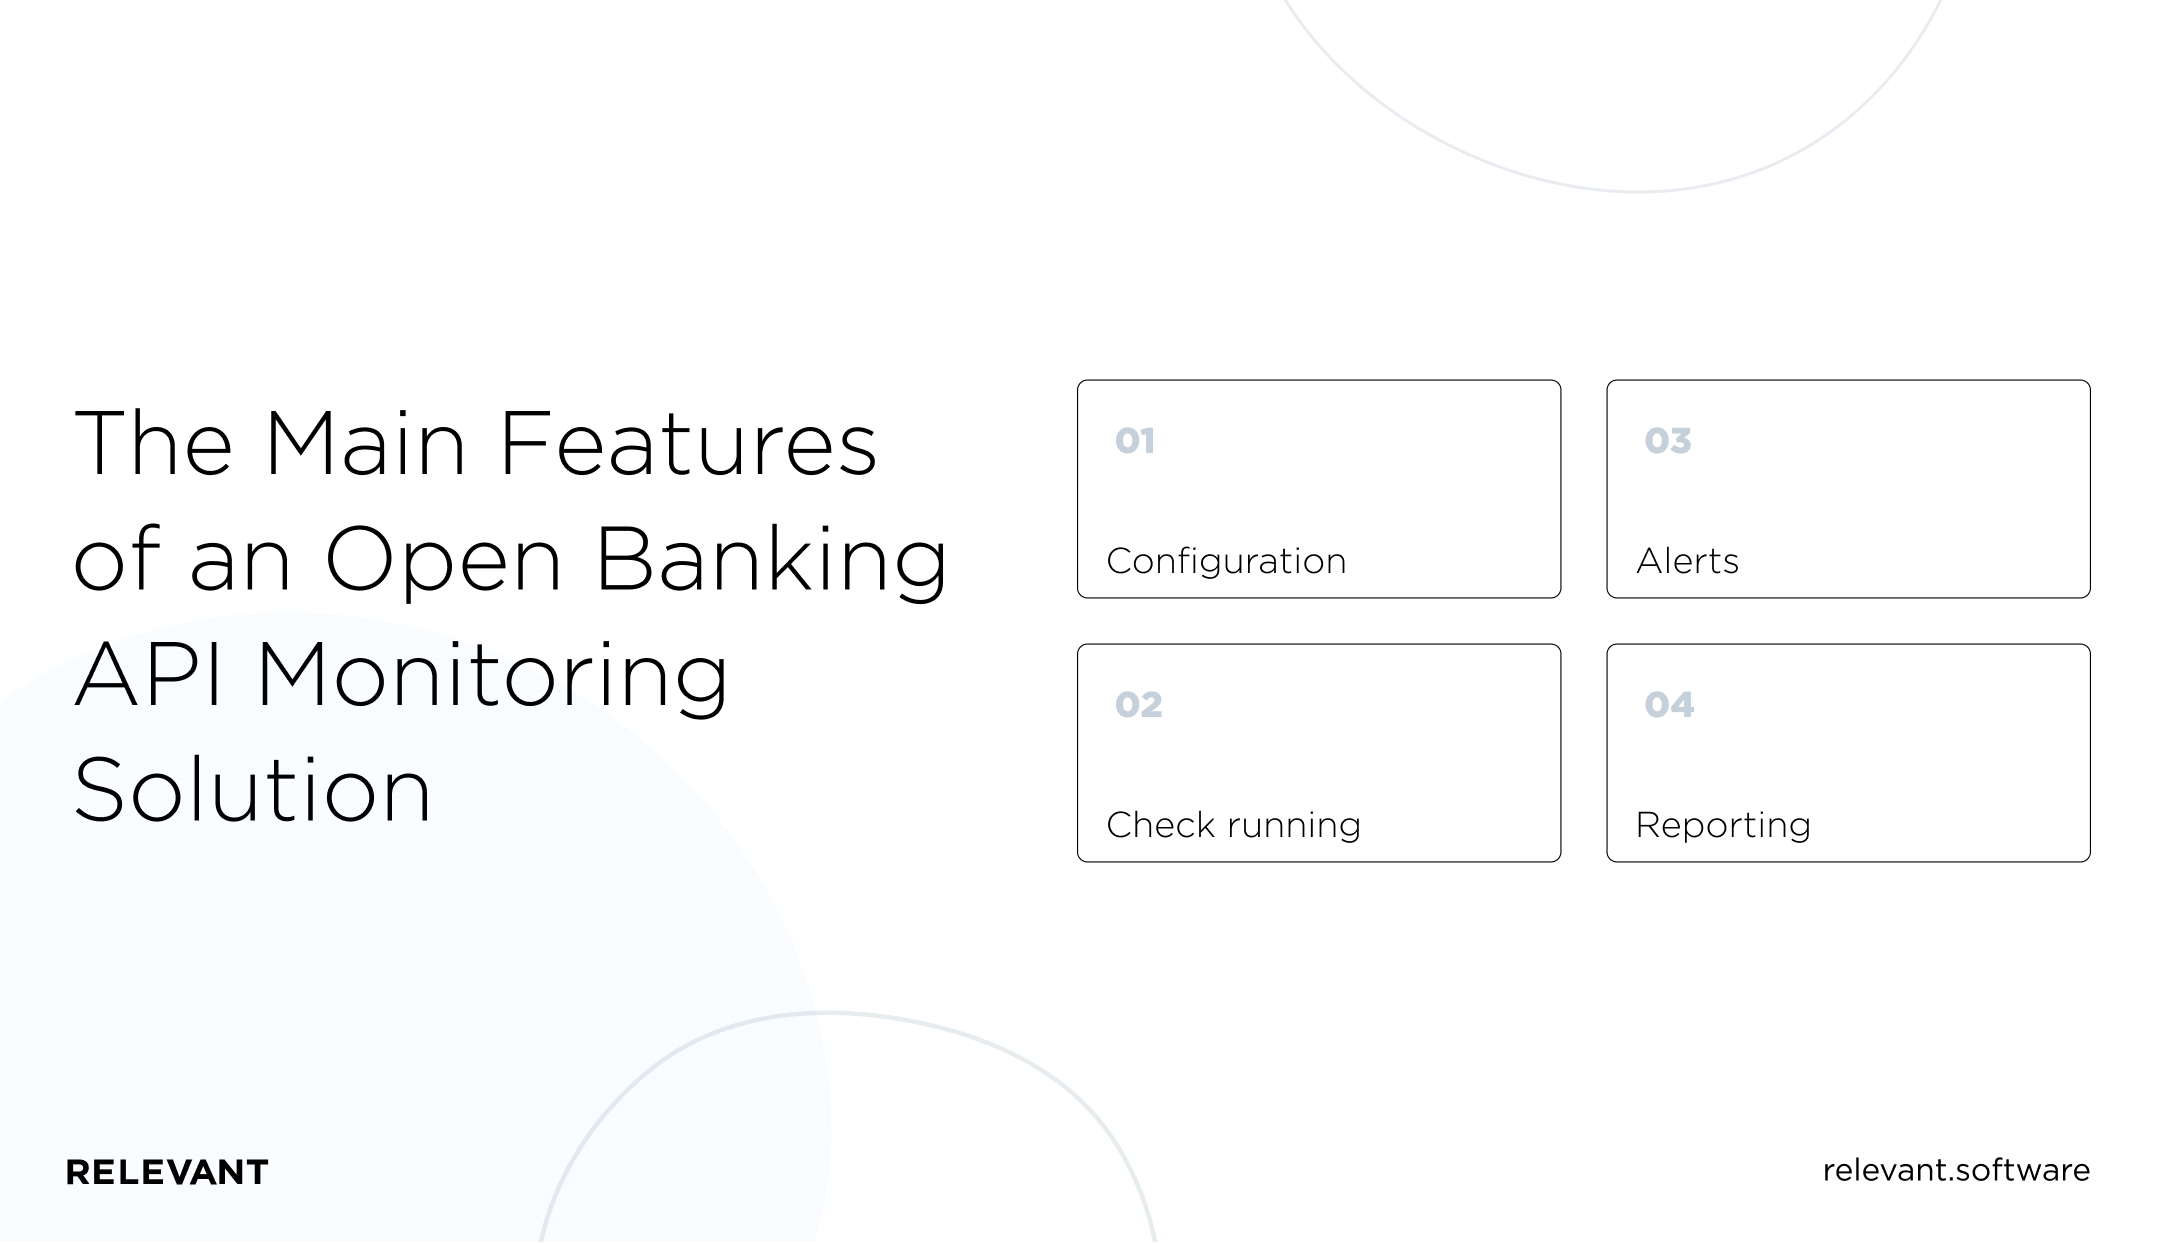 The Main Features of an Open Banking API Monitoring Solution